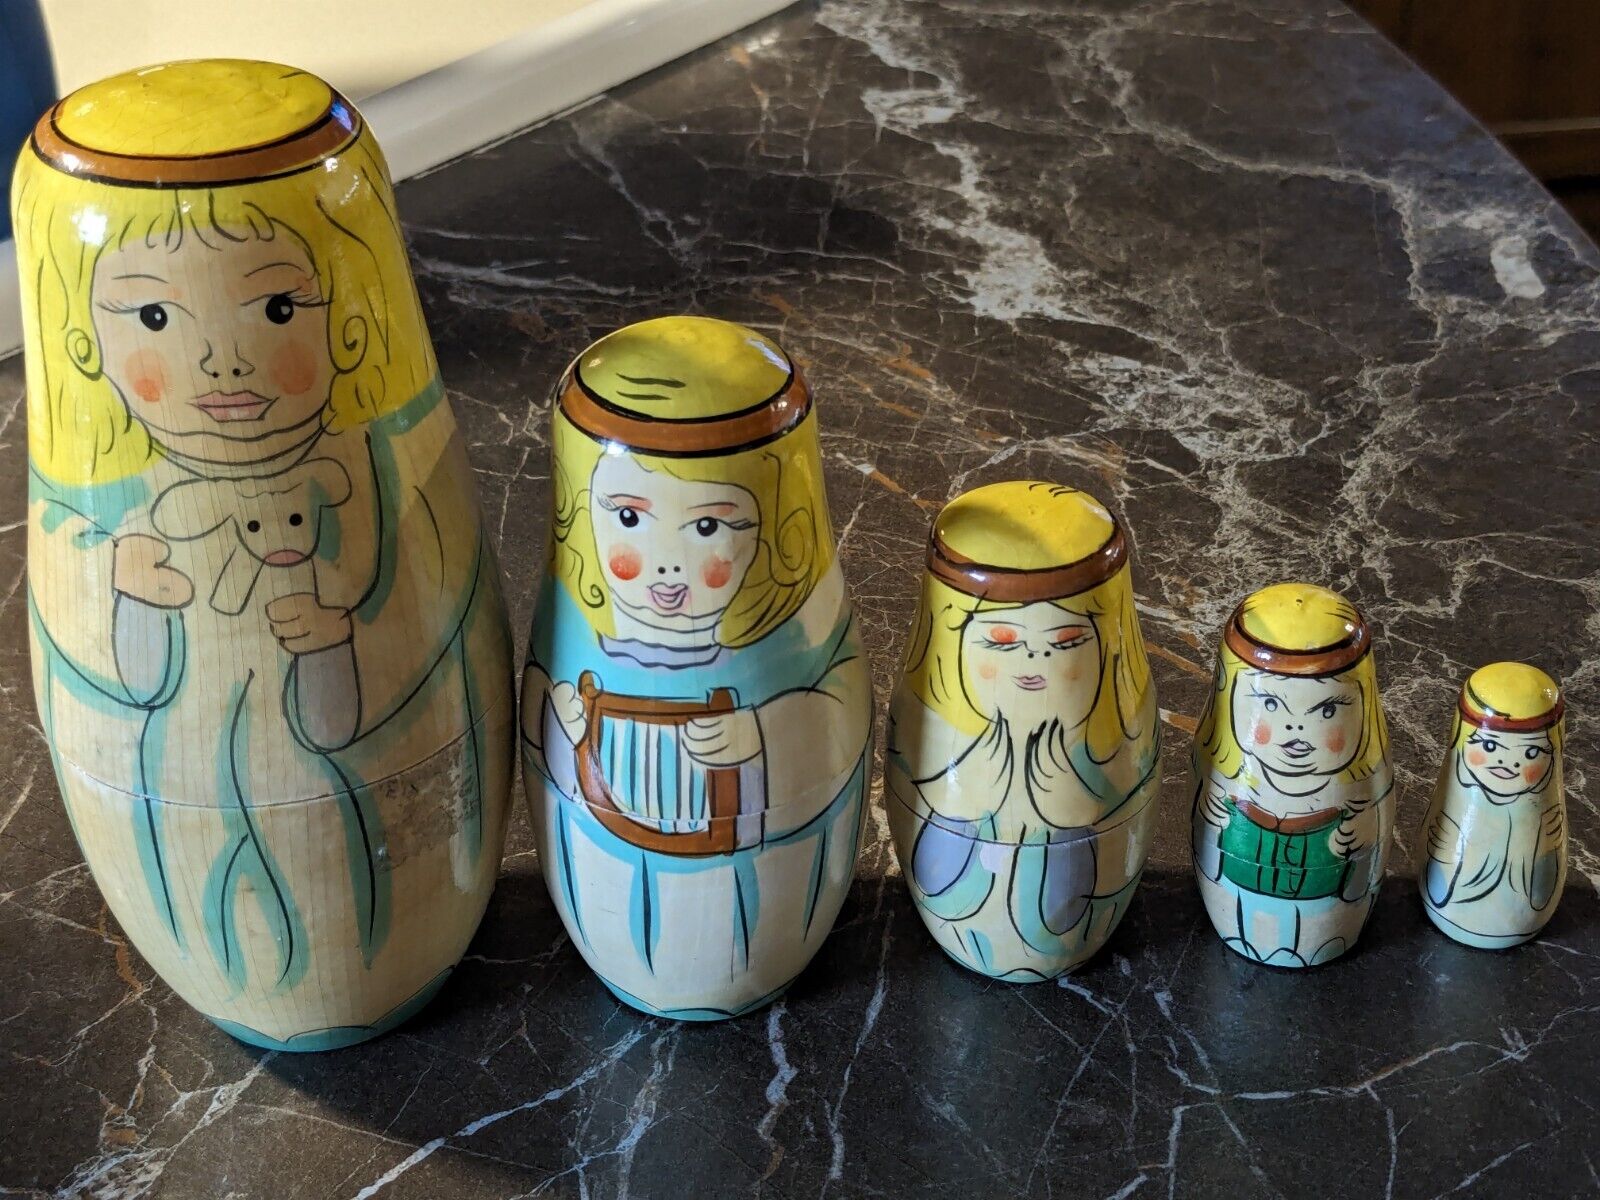 Russian Style Nesting Dolls( 5 Piece) Unique & Definitely Hand Painted - Angels